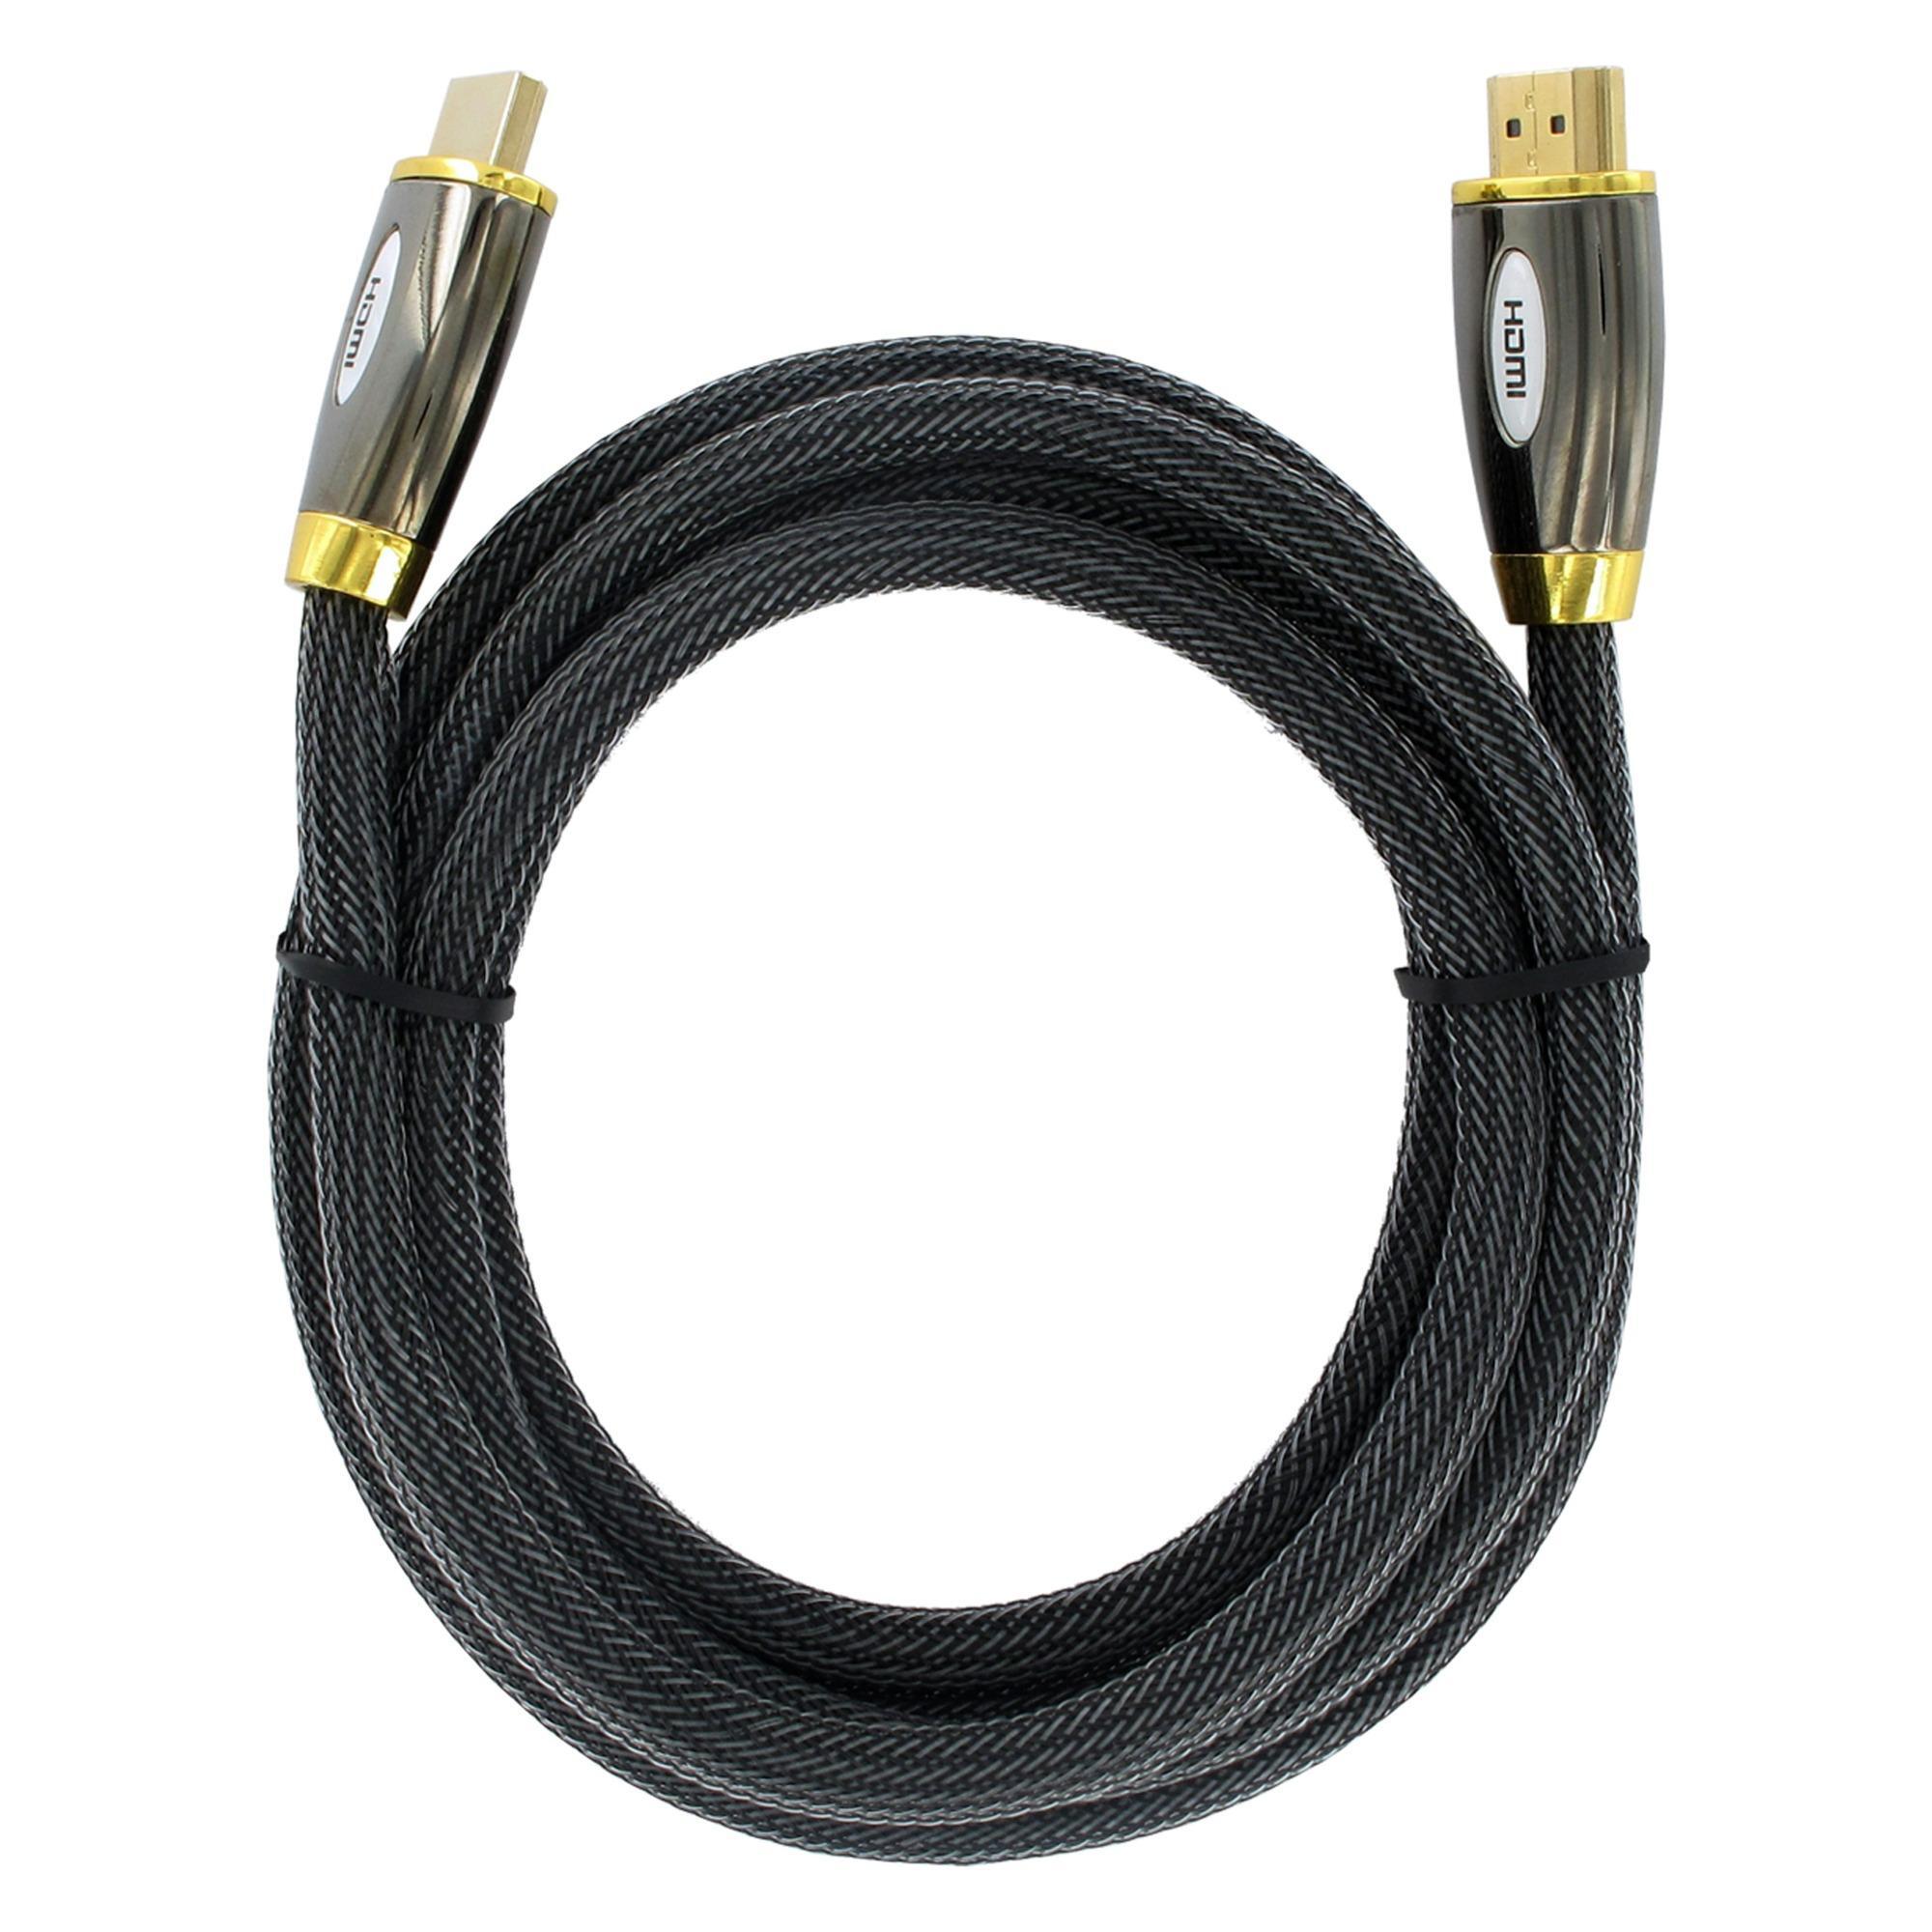 Q-Link hdmi kabel h speed gold plated 3d 2.0m